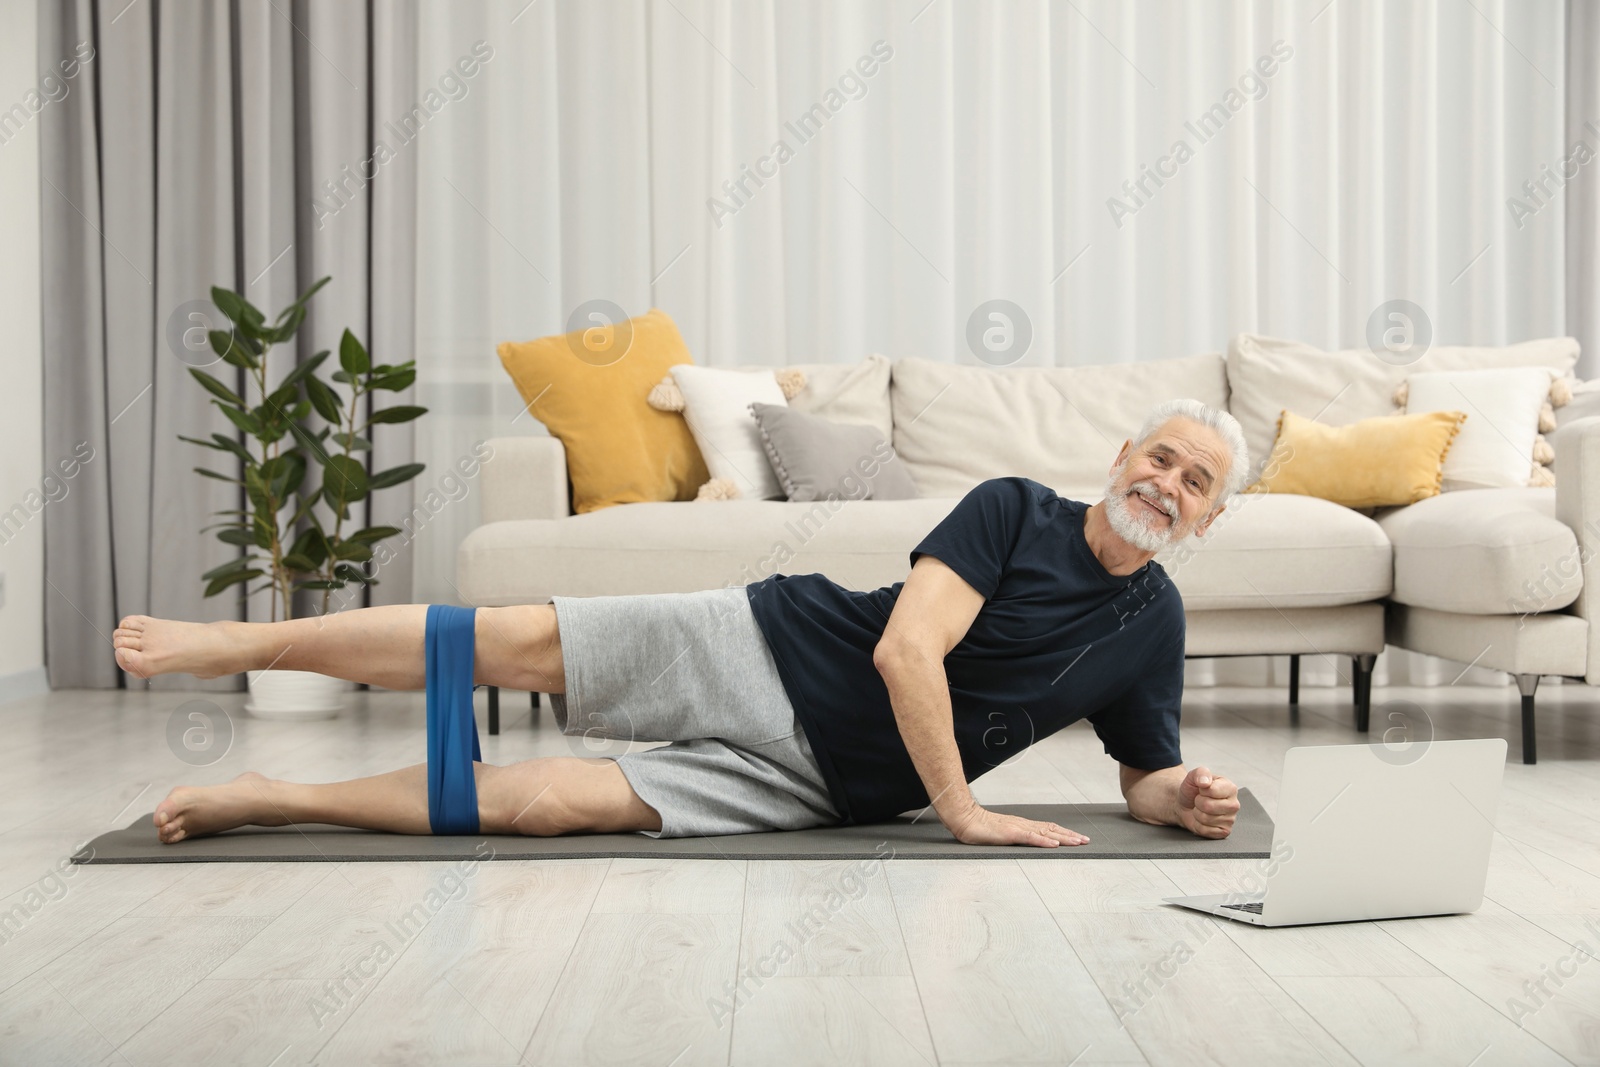 Photo of Senior man doing exercise with fitness elastic band near laptop on mat at home